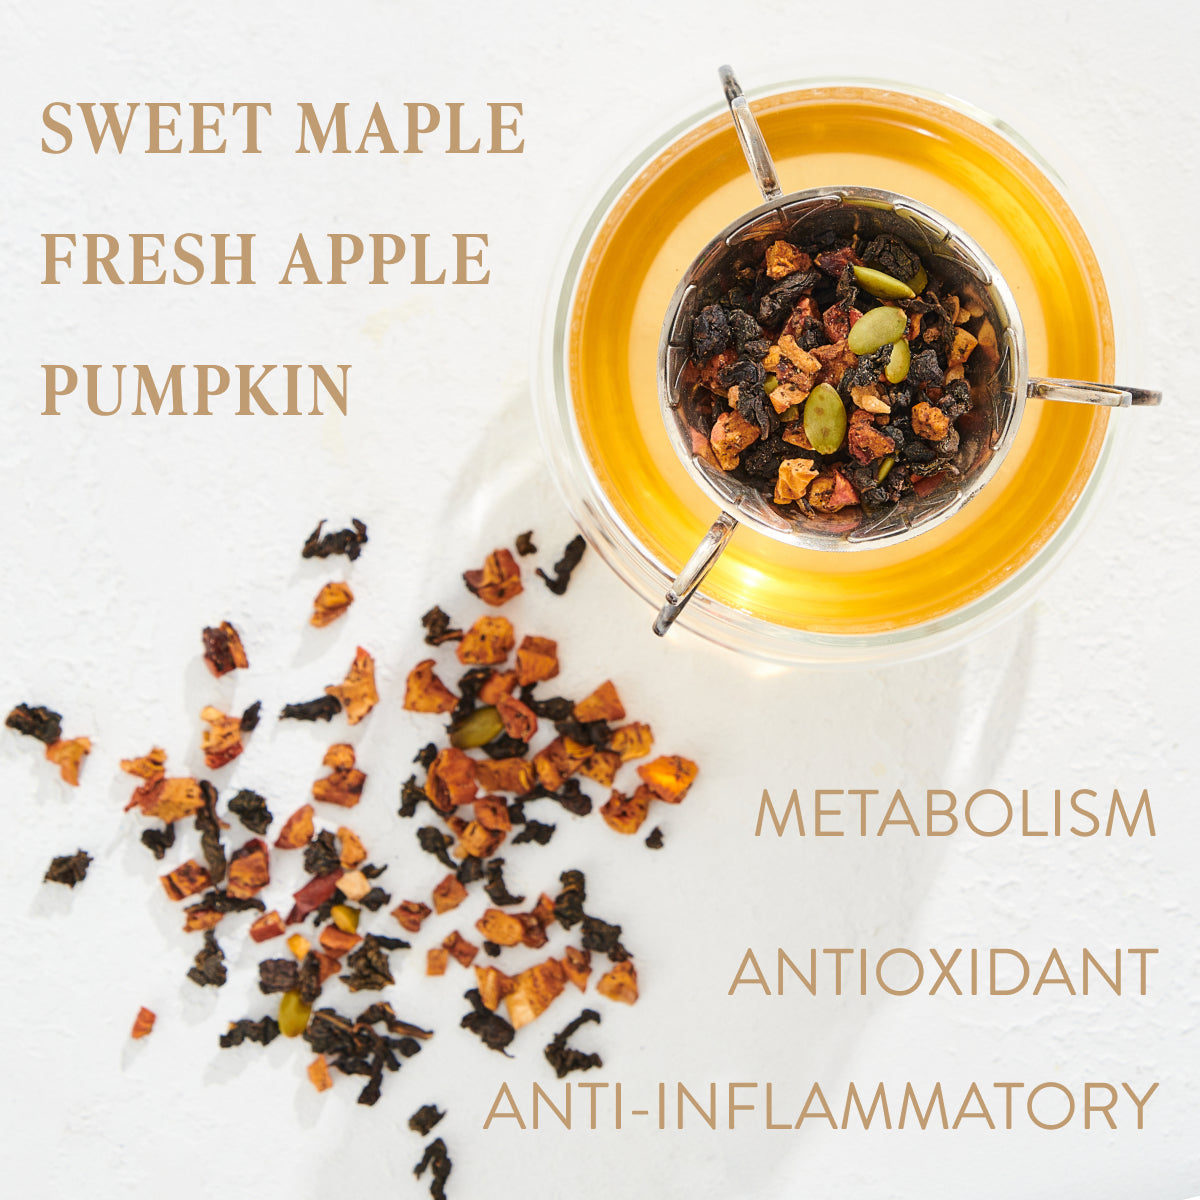 A cup of tea with a blend of sweet maple, fresh apple, and pumpkin pieces. The organic loose leaf tea is shown steeping with some scattered beside it. Words stating "METABOLISM," "ANTIOXIDANT," and "ANTI-INFLAMMATORY" are displayed. Discover the Magic Hour Capricorn: Maple Oolong Tea experience today.